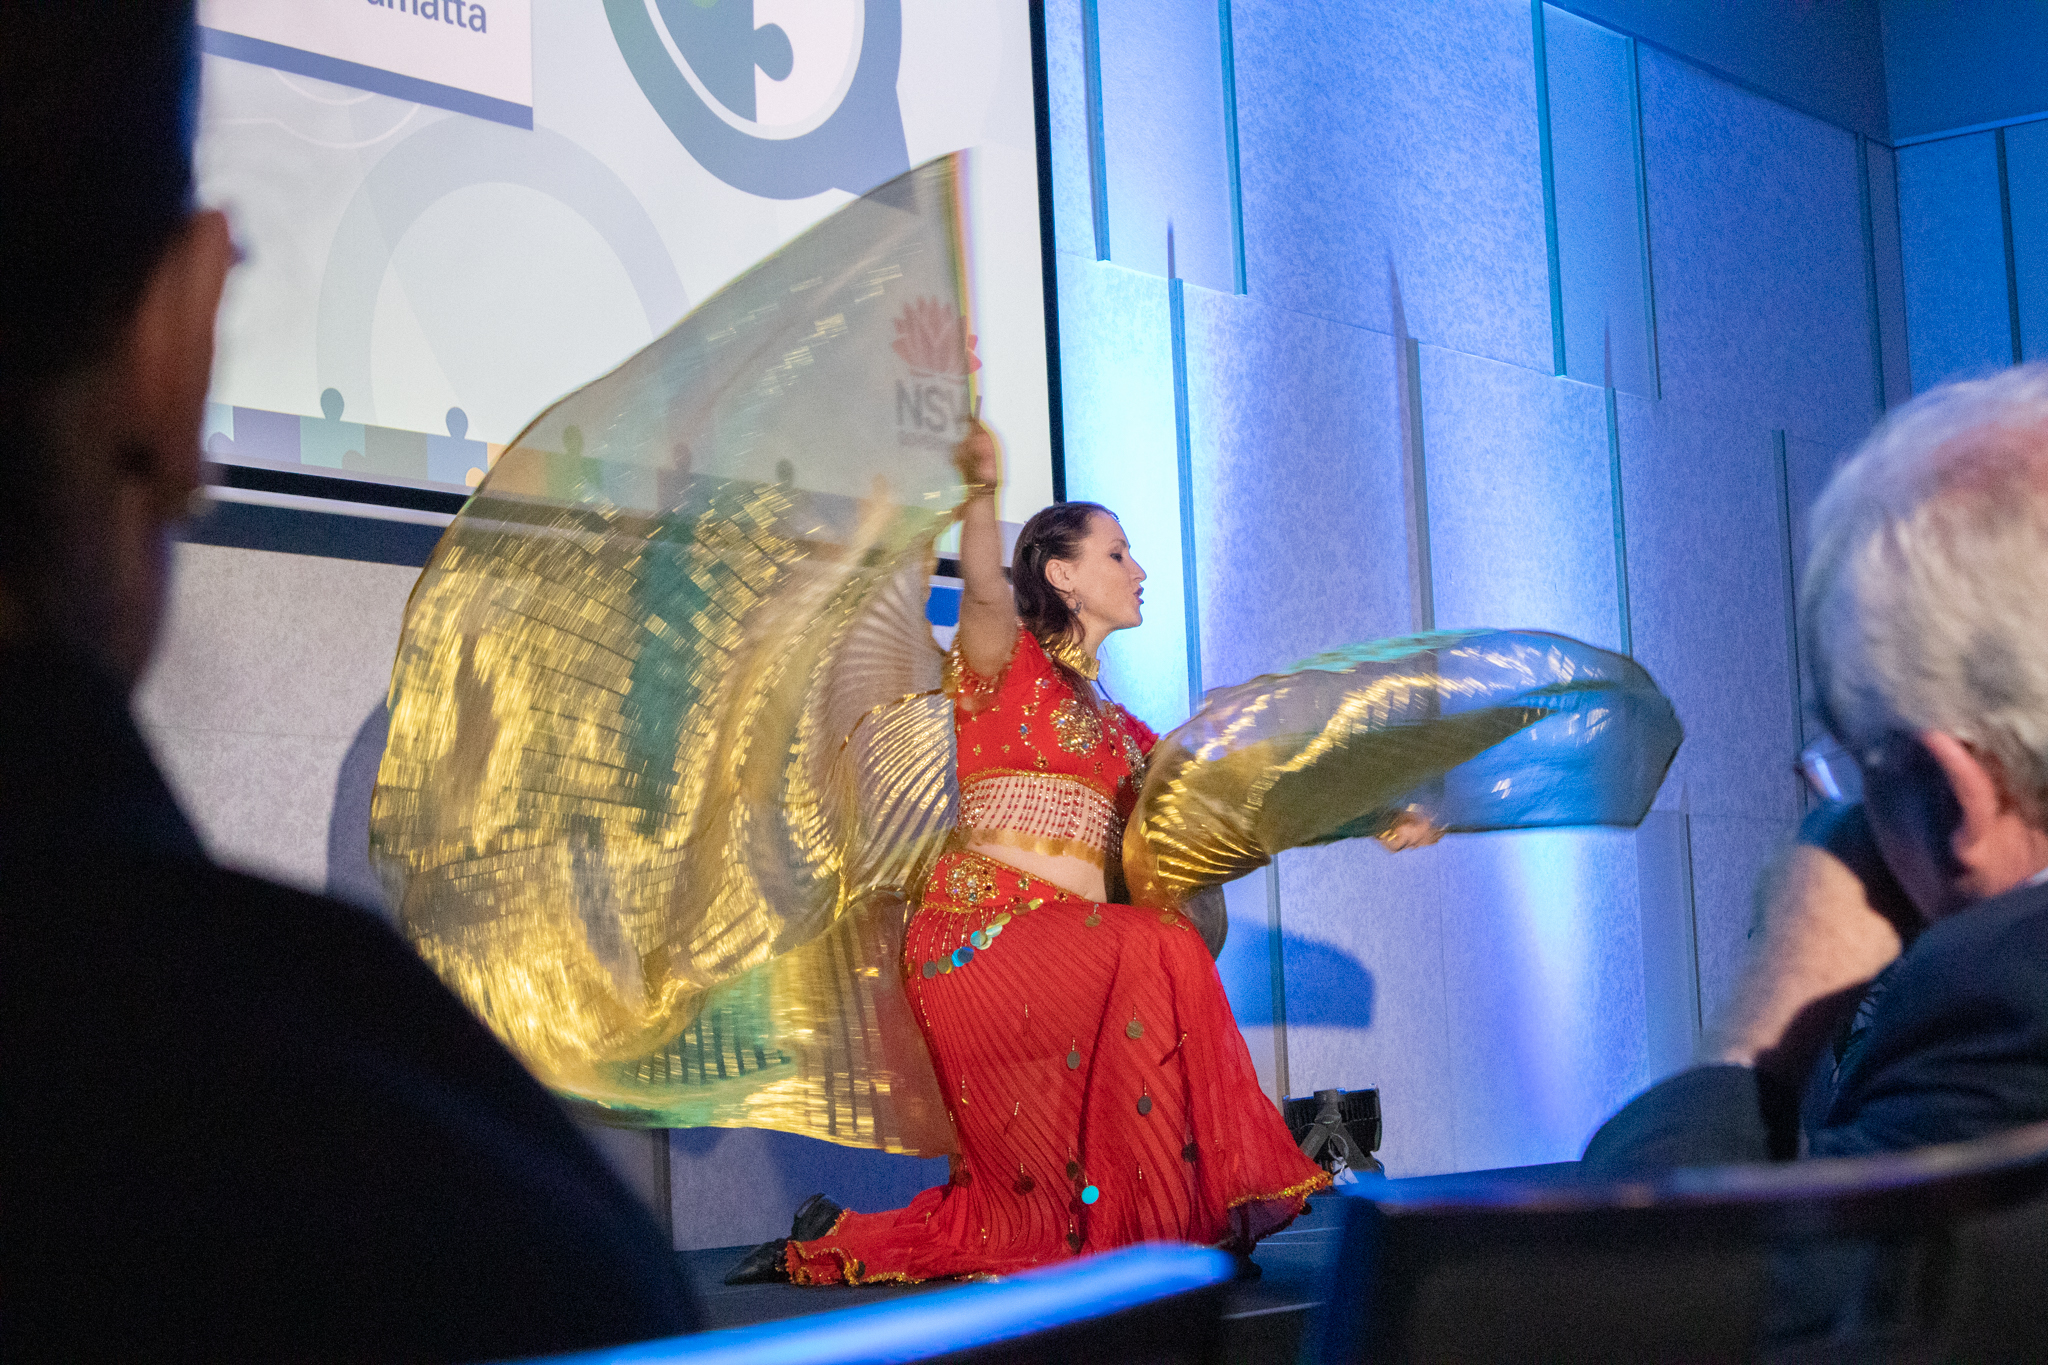 Bollywood dancer on stage